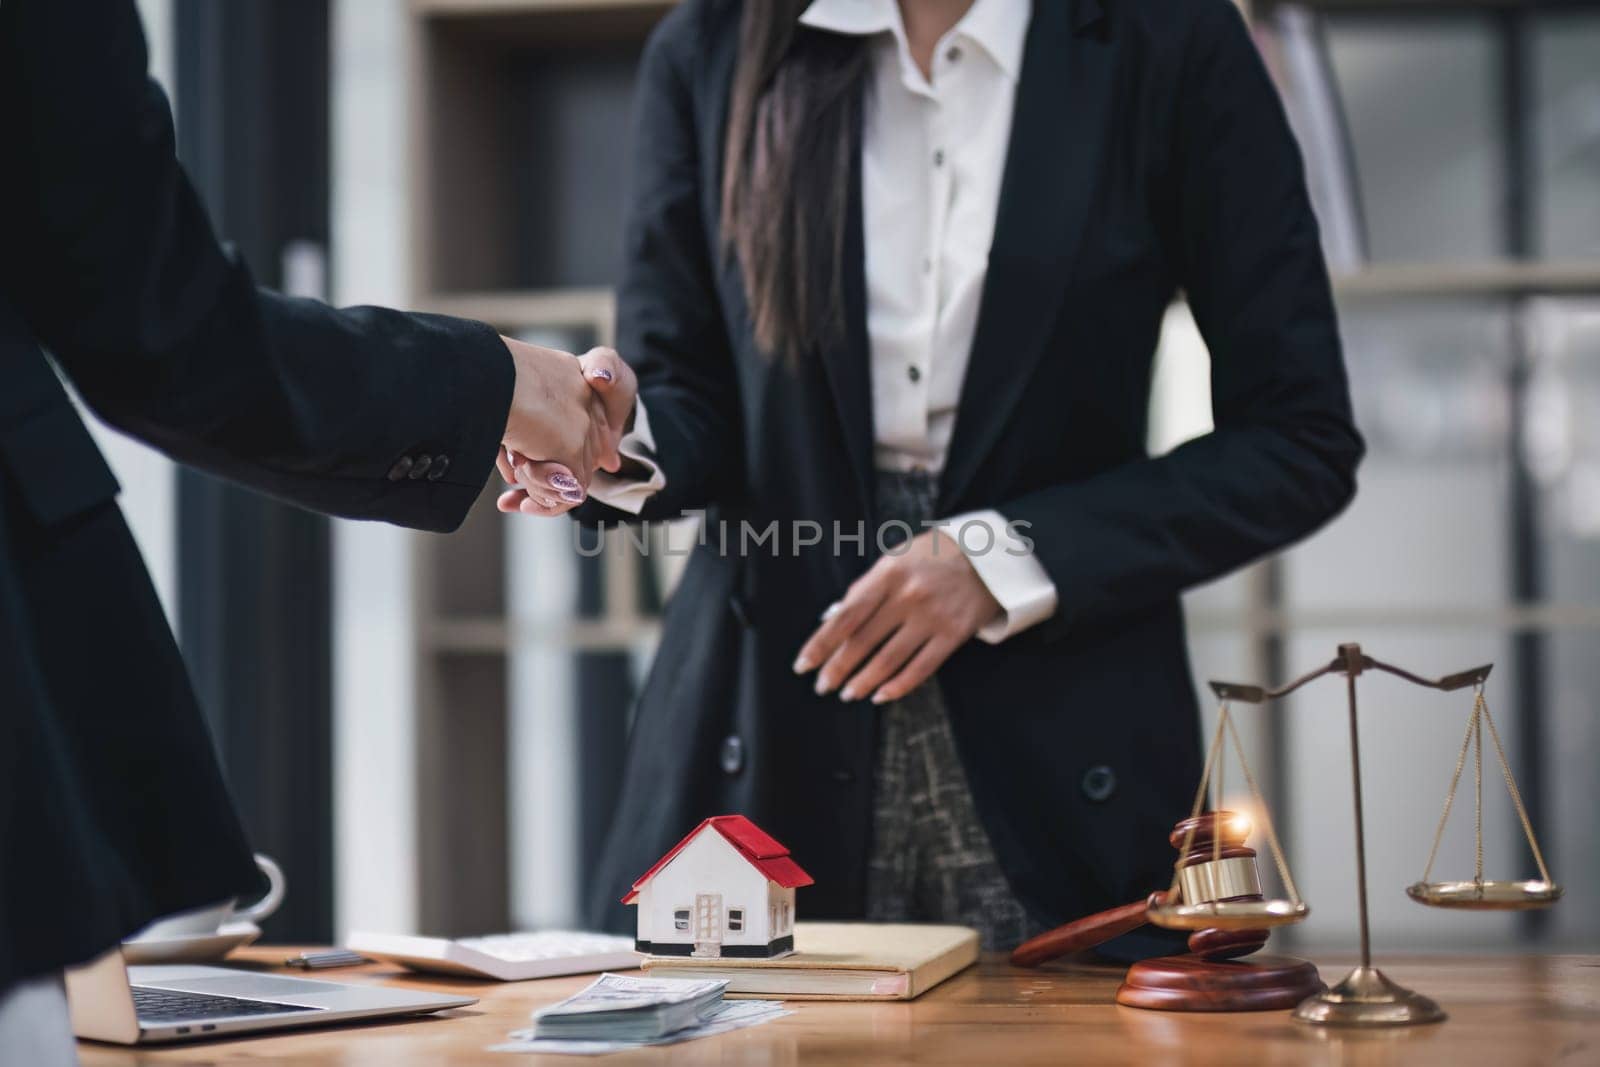 Handshake of cooperation customer and saleswoman after agreement, successful car loan contract buying or selling new vehicle...